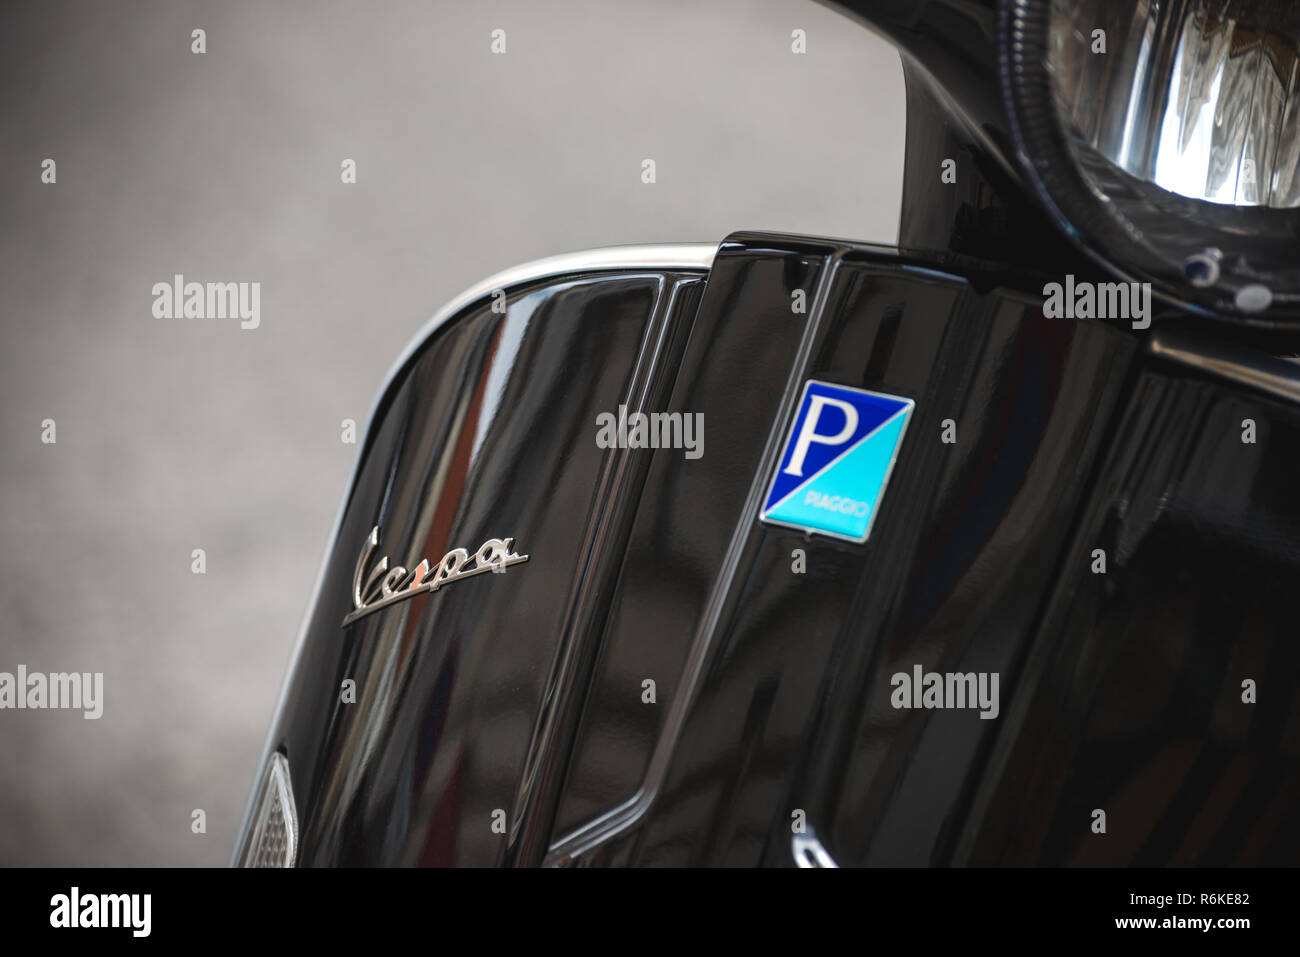 Vienna, Austria - July 18, 2018: Close up detailed view of modern black Vespa scooter with logo by Piaggio Stock Photo